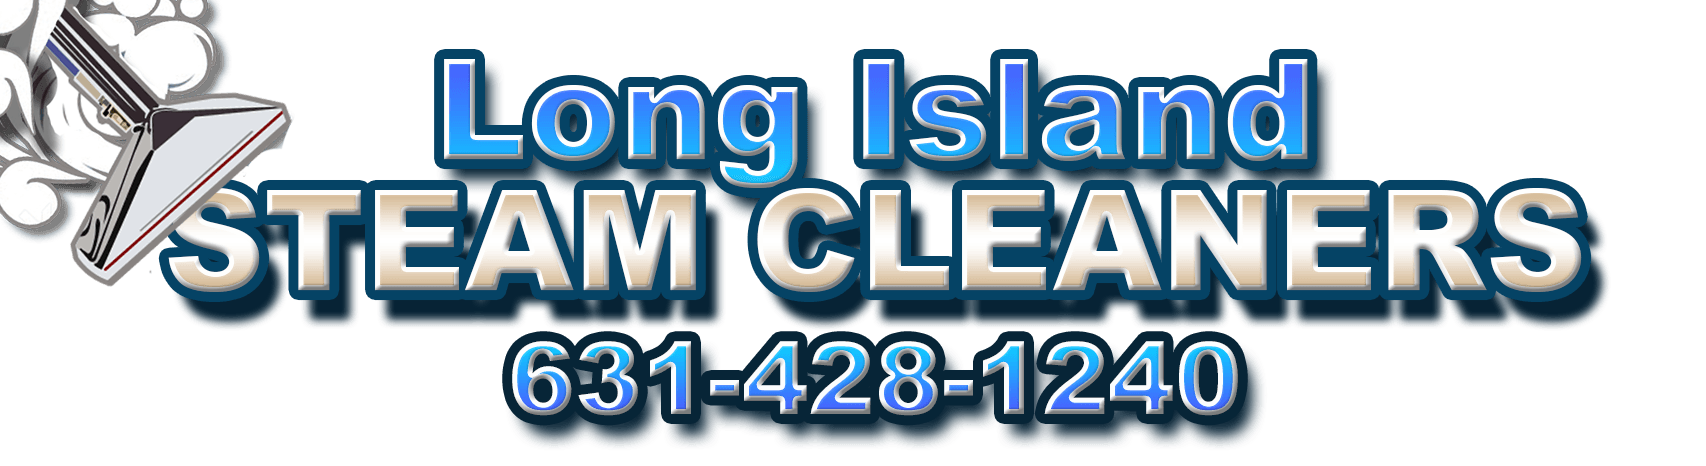 Steaming Cleaning Long Island